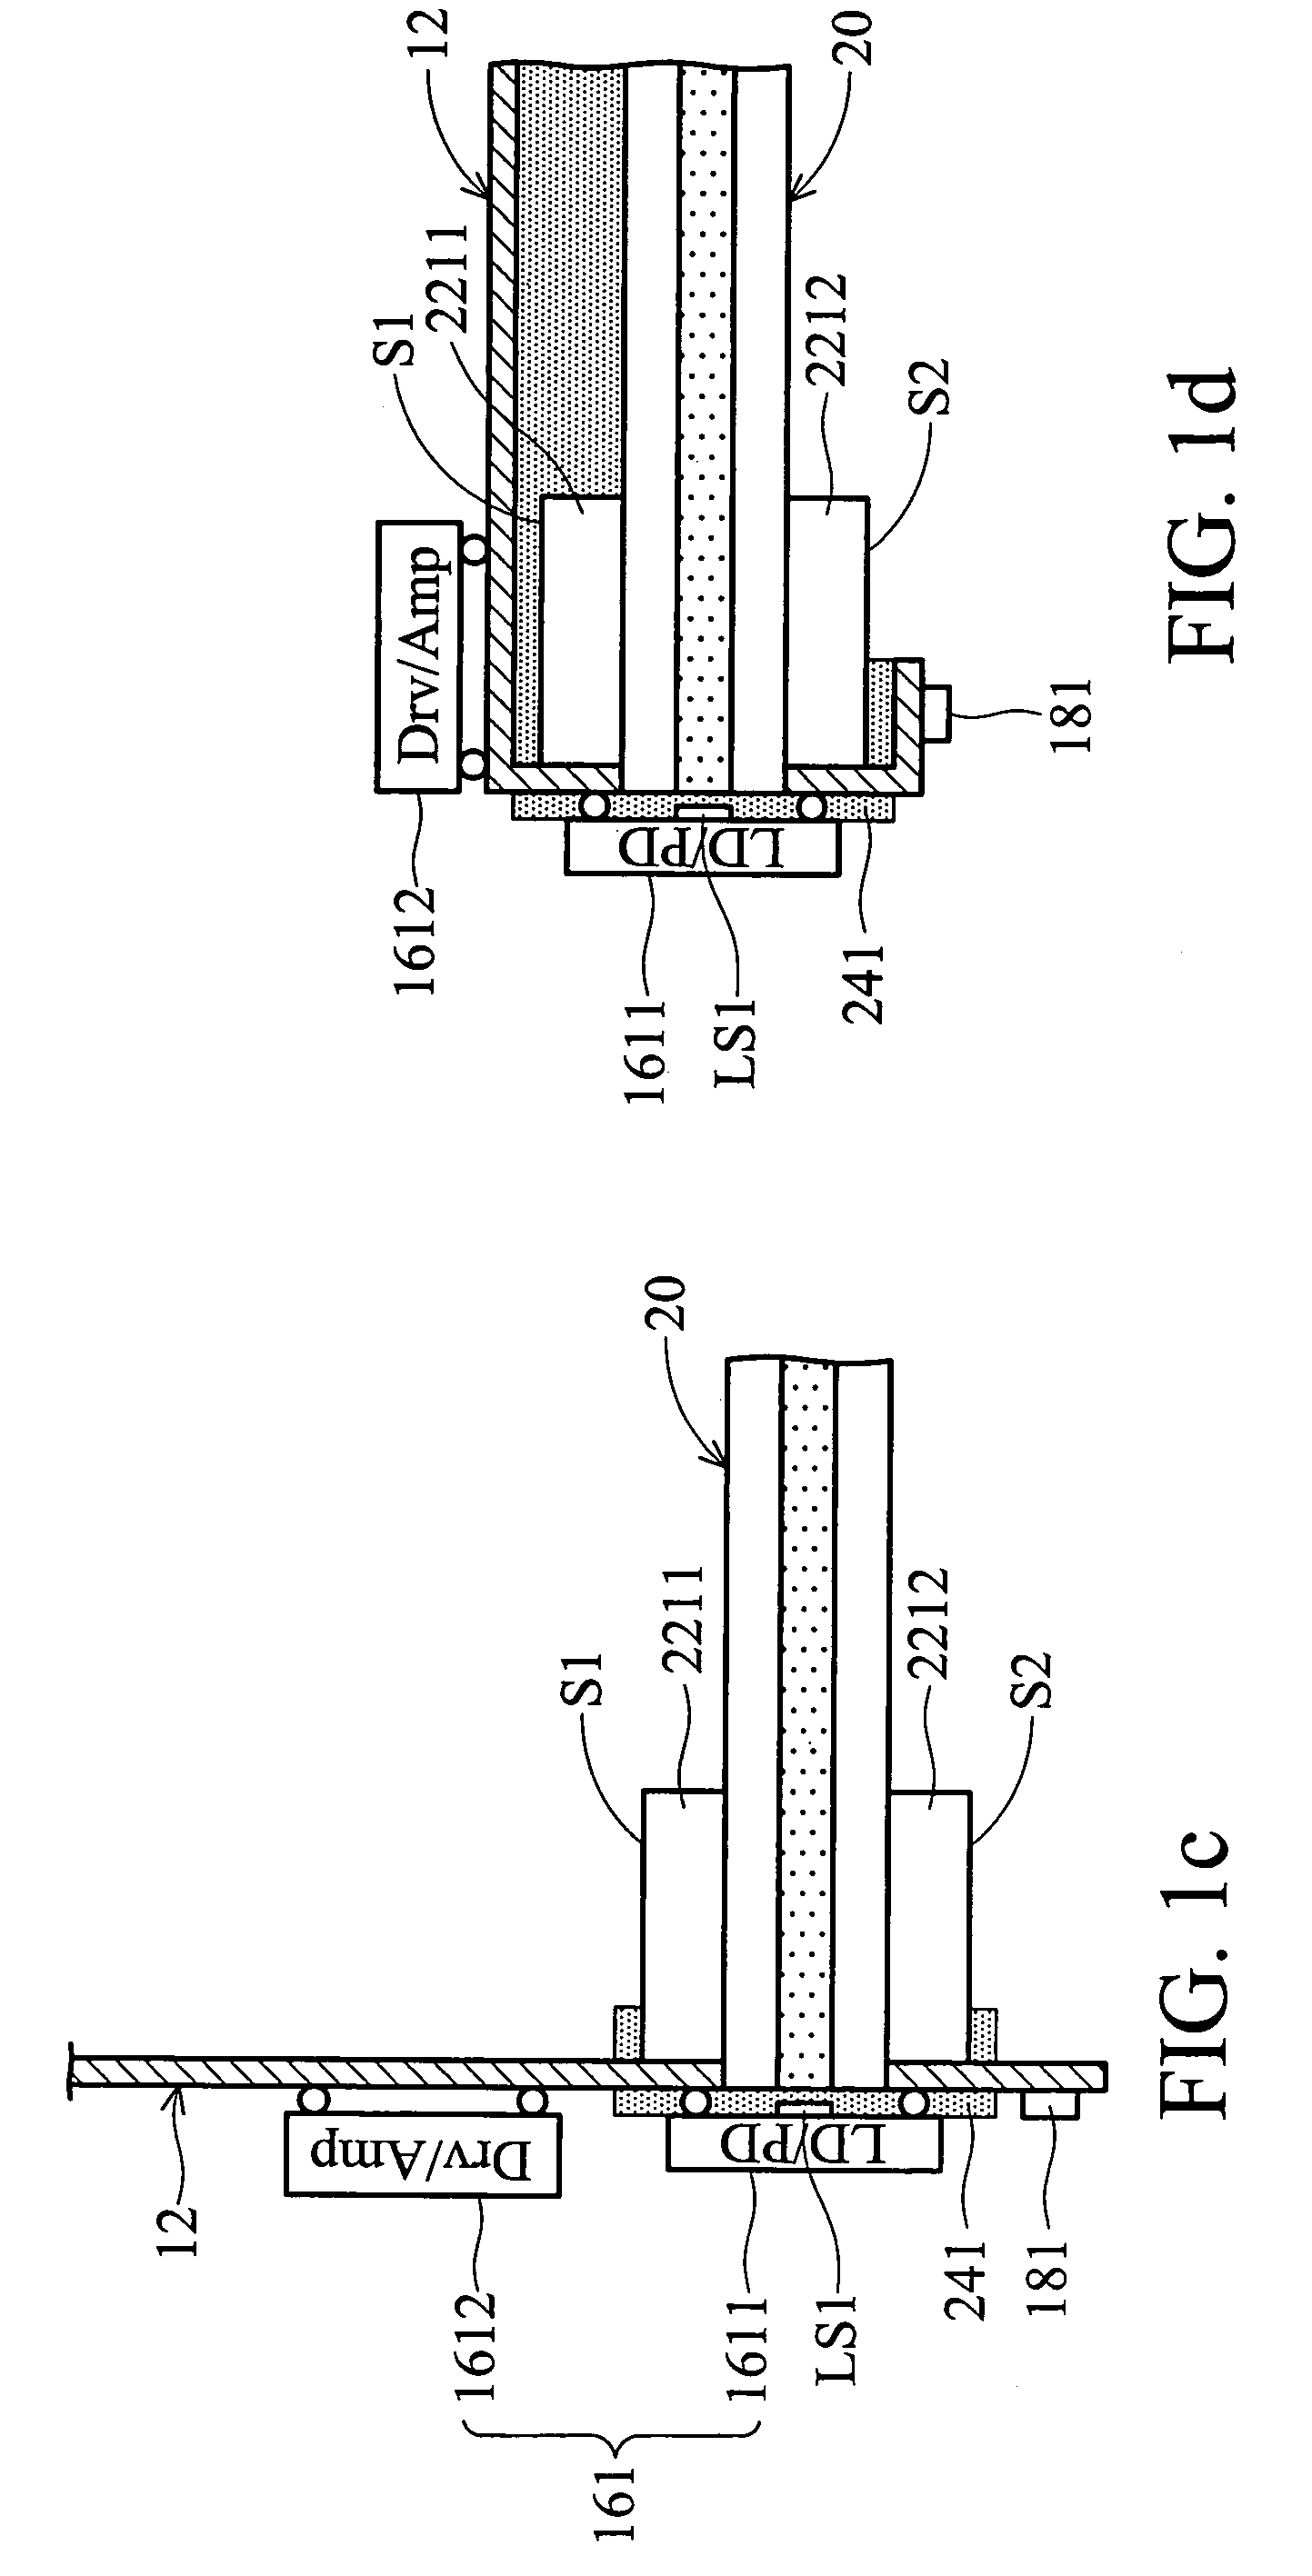 Optoelectronic transmission module and fabrication method thereof